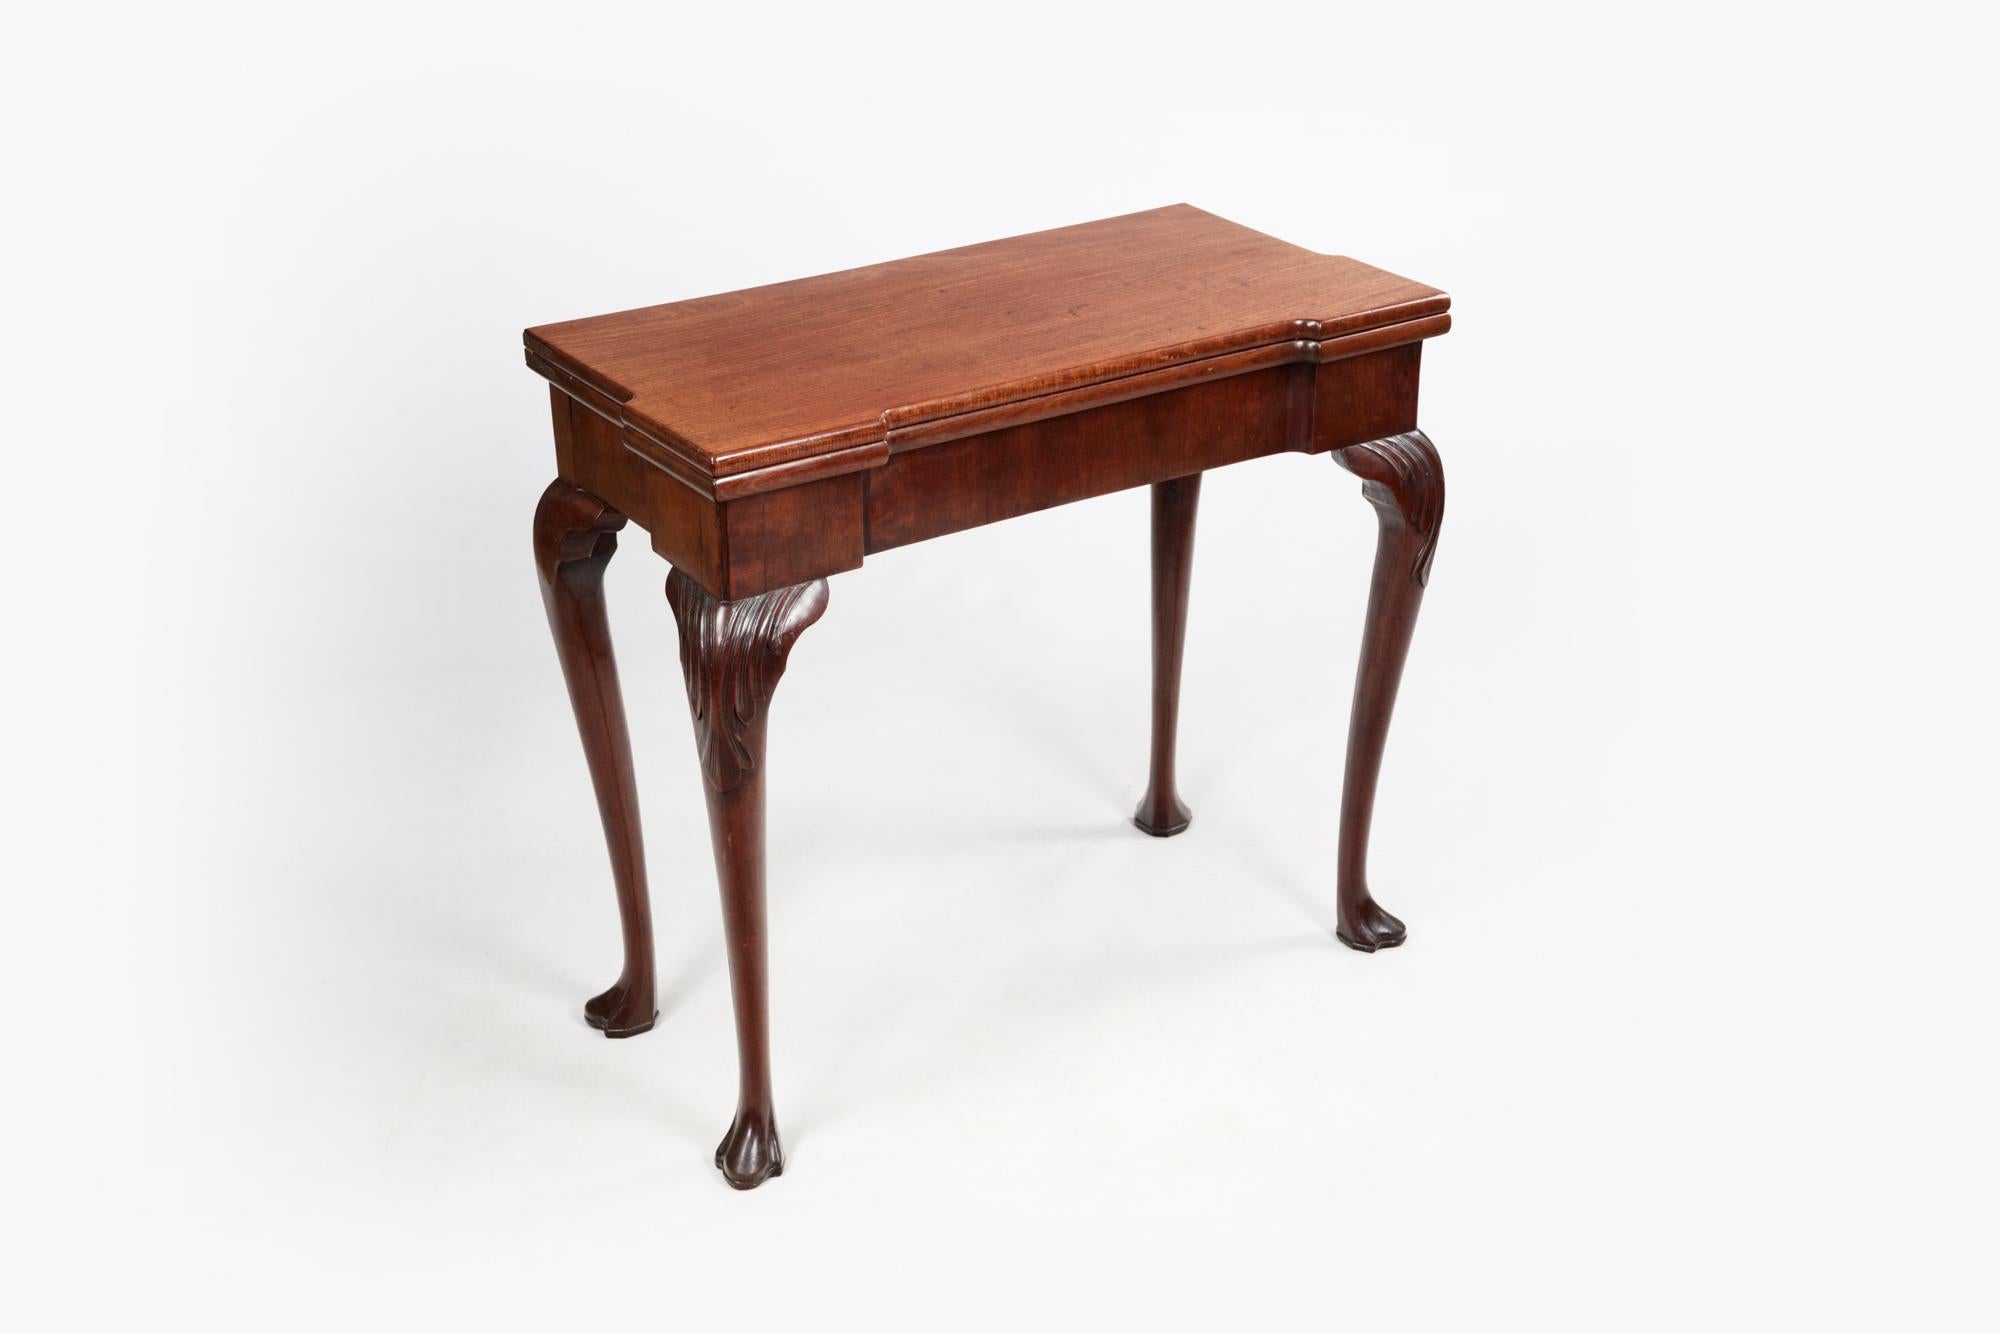 18th Century Irish mahogany games table with breakfront foldover top, cabriole legs terminating in trefoil feet & felt-lined surface on the Interior. To the rear are twin gatelegs with pad feet that pull out to support the open table.